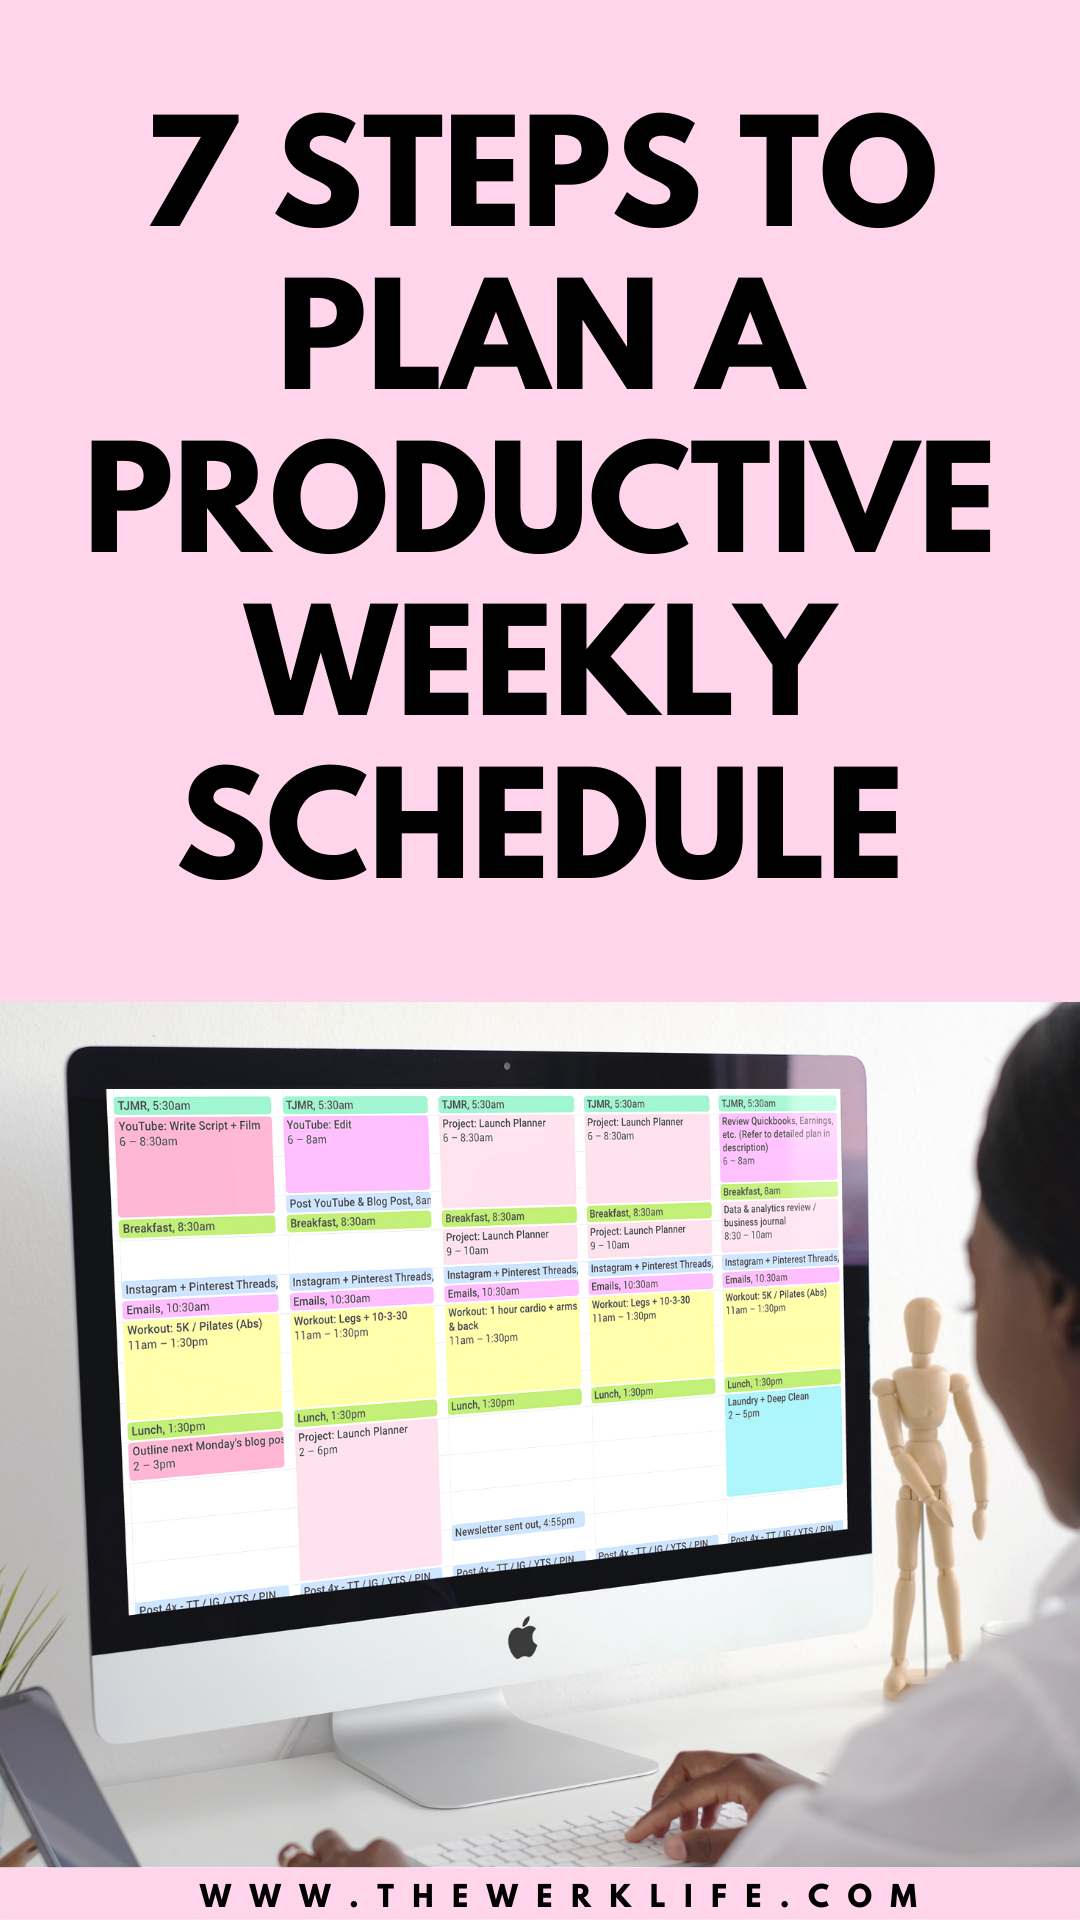 Planning - How to plan your week - schedule and organize your calendar